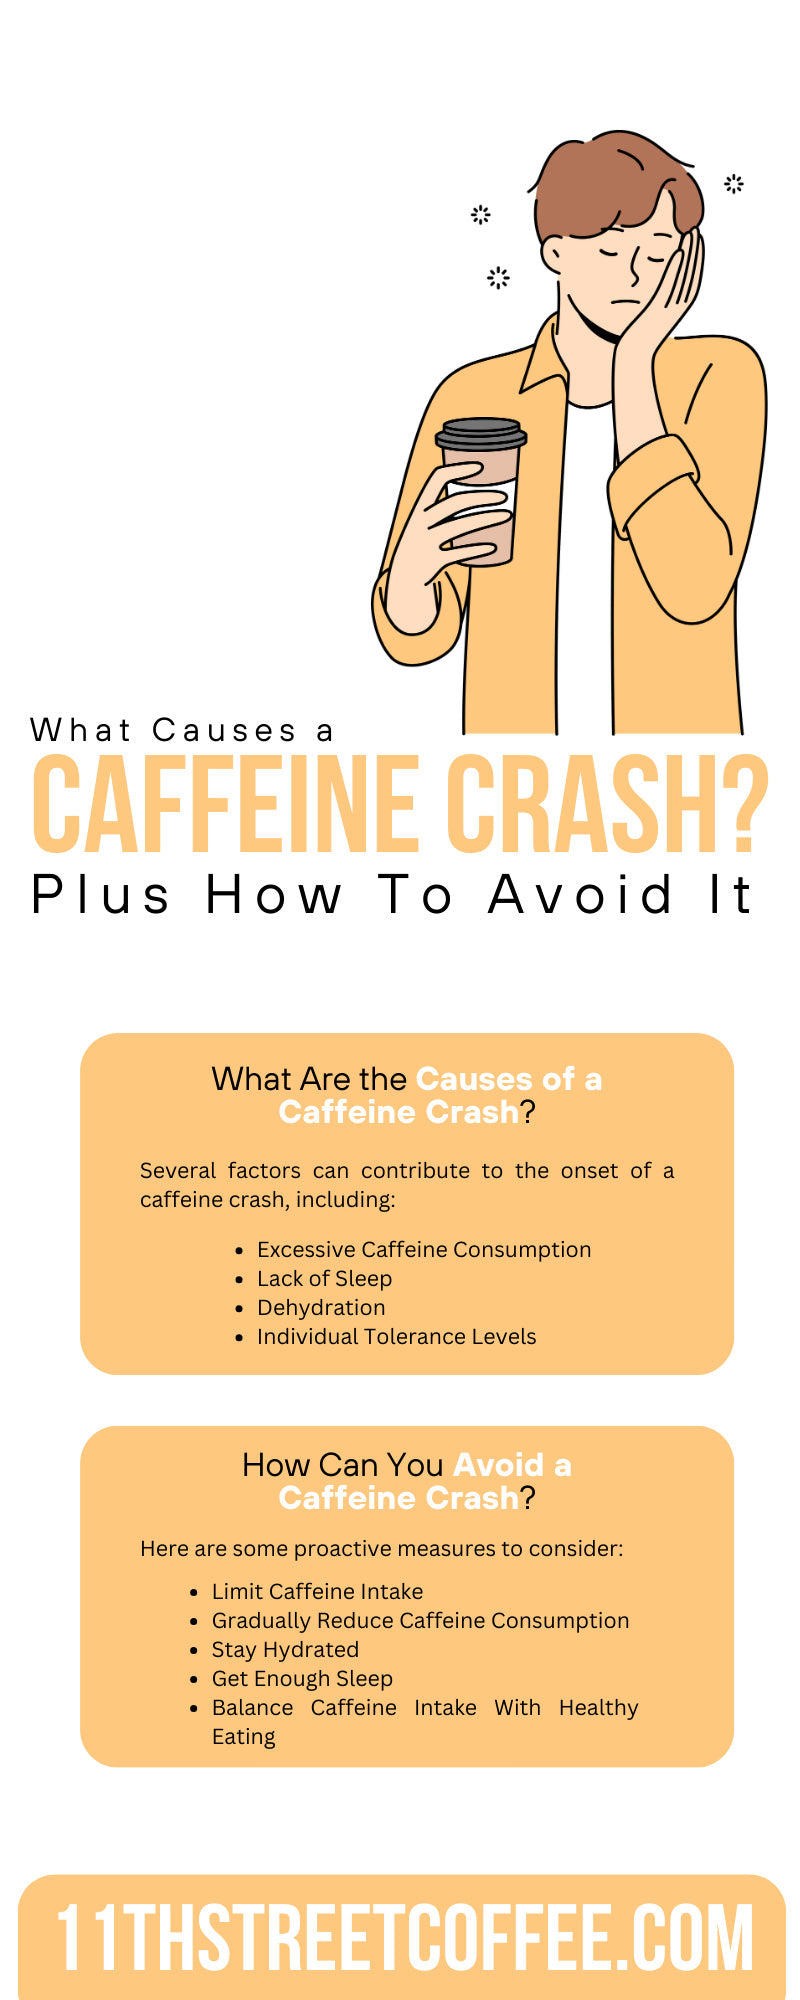 What Causes a Caffeine Crash? Plus How To Avoid It